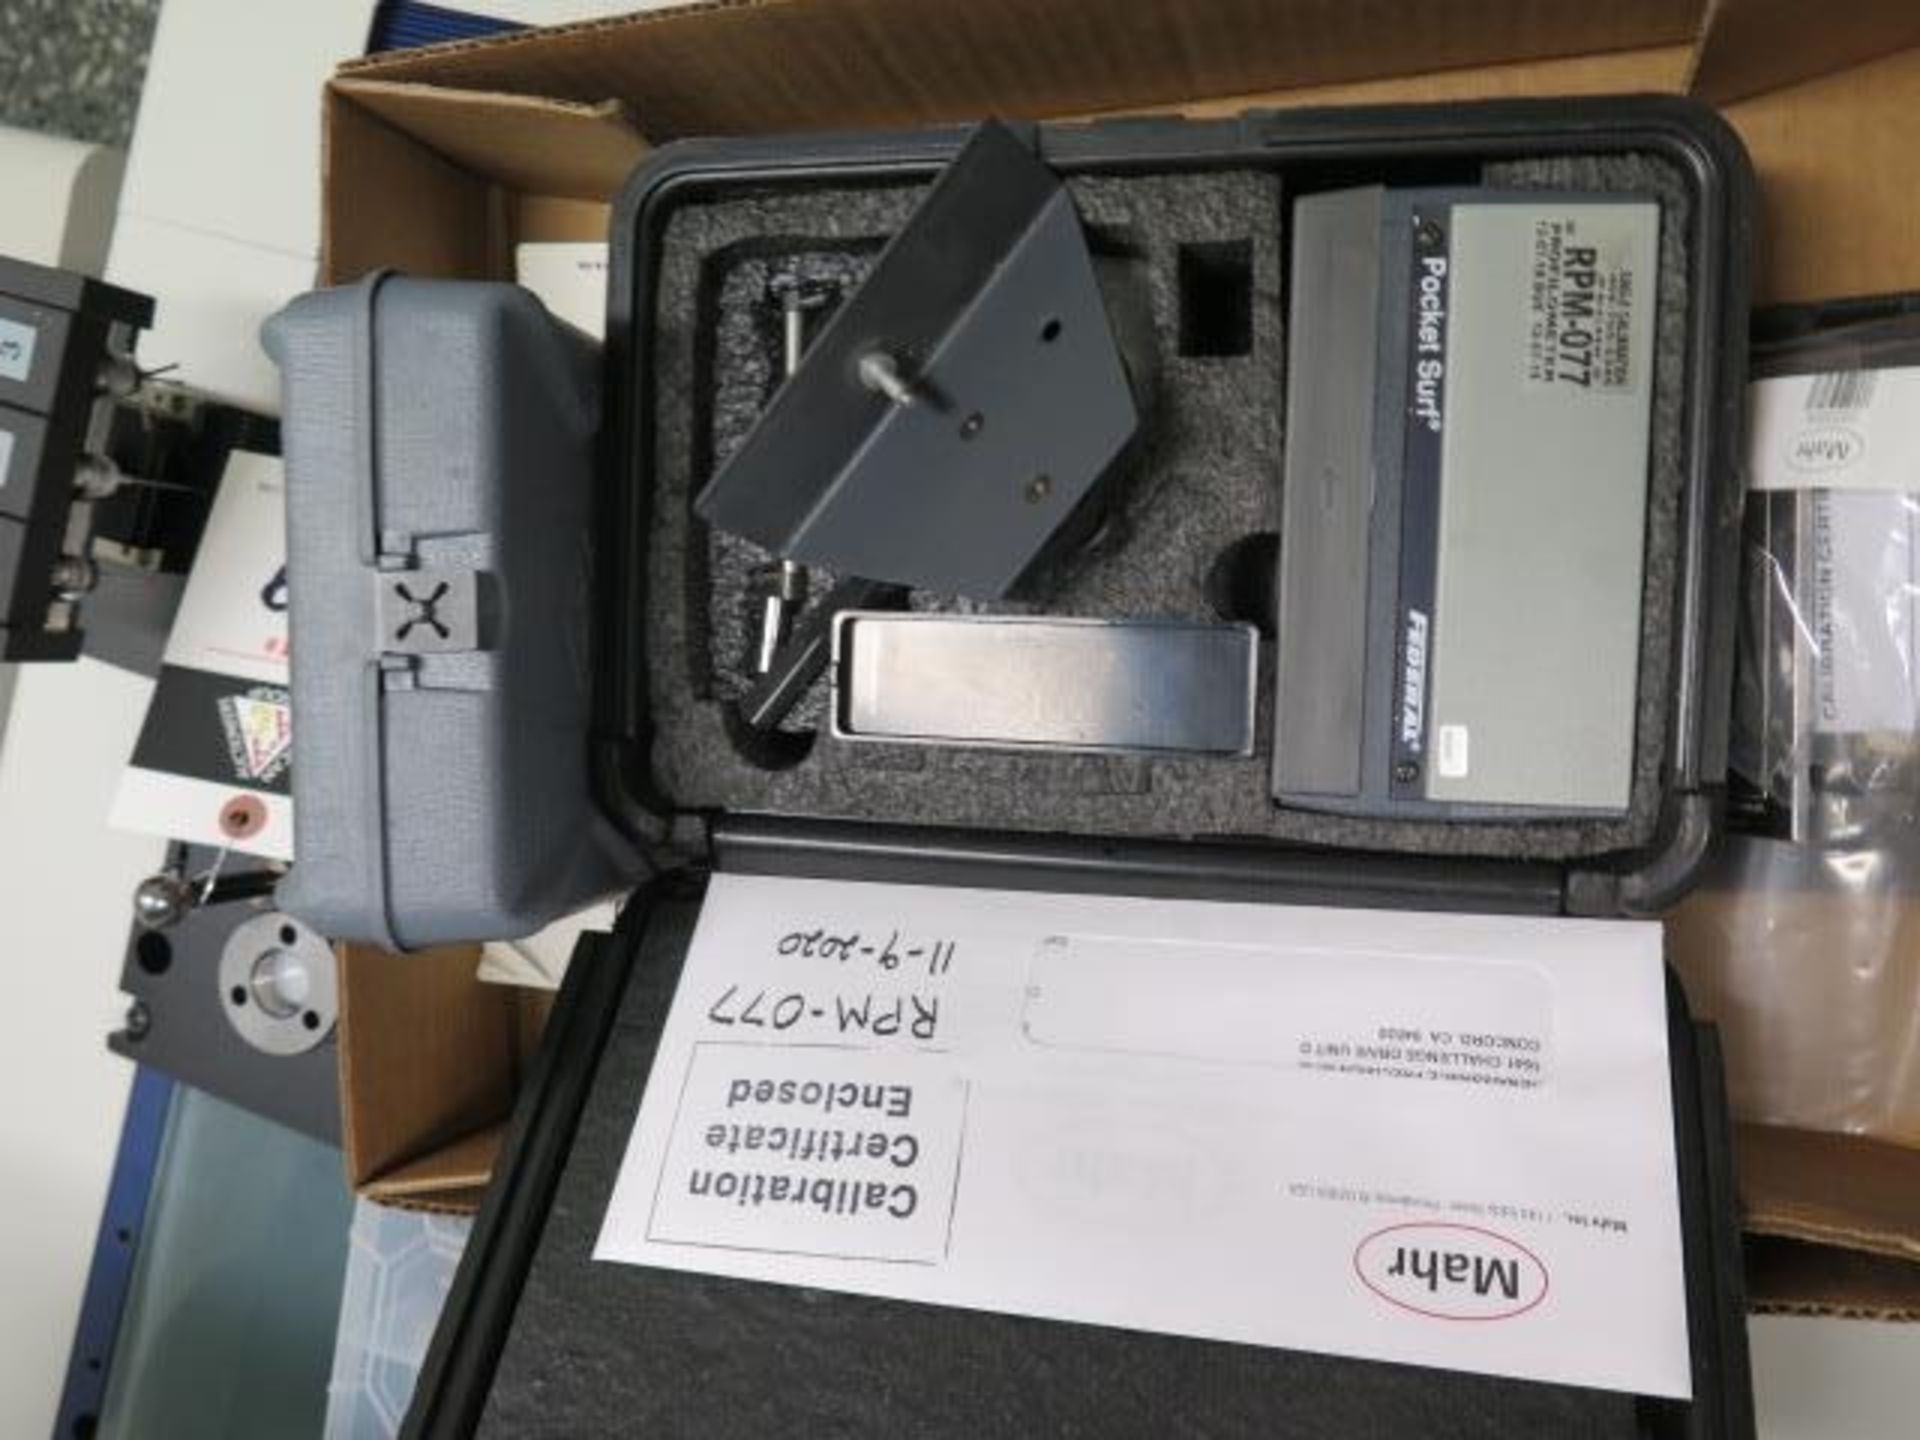 Federal “Pocket Surf” Digital Surface Roughness Gage (SOLD AS-IS - NO WARRANTY) - Image 2 of 5